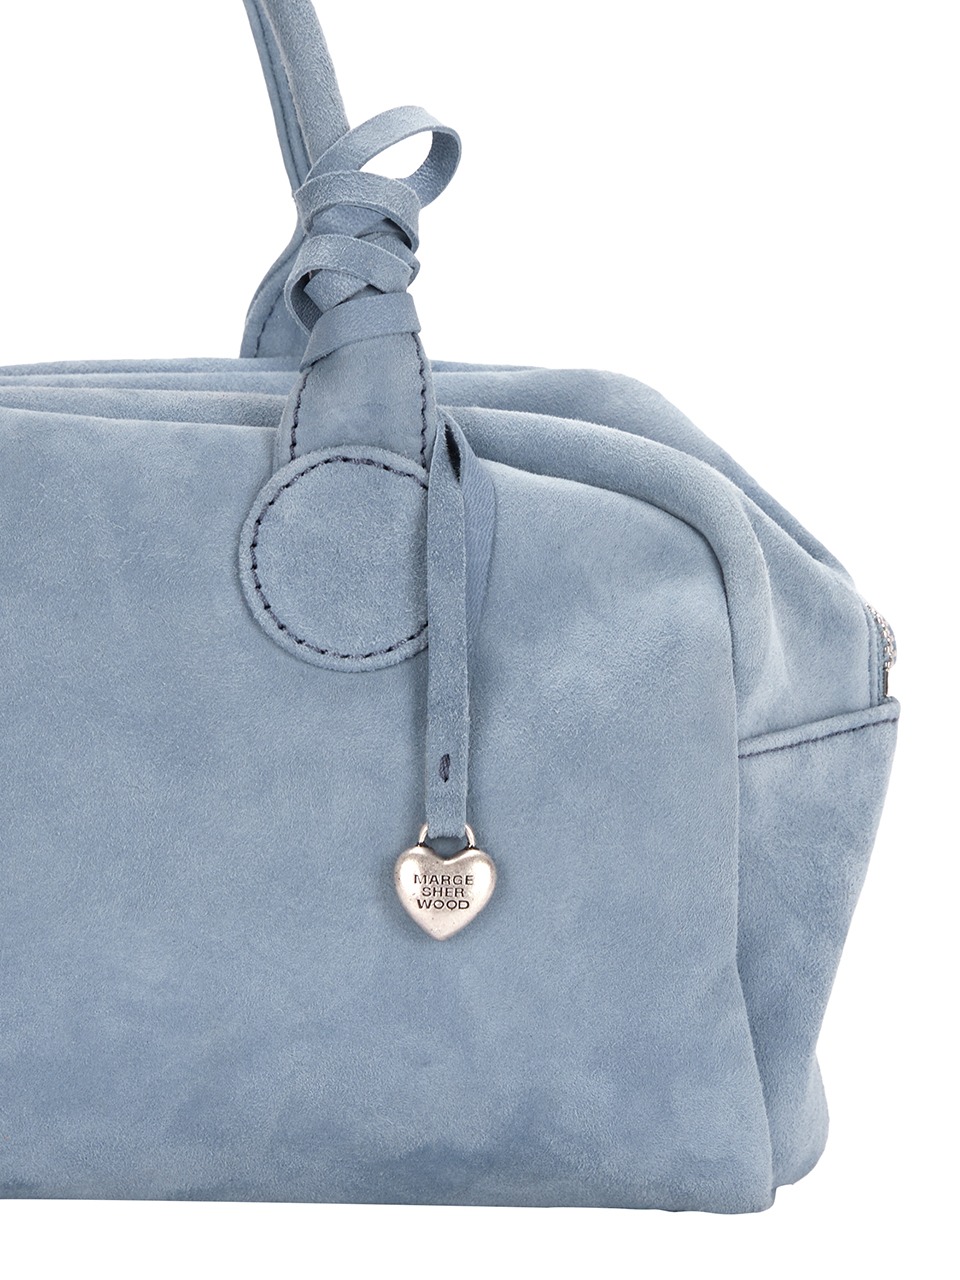 HEART CHARM_blue suede